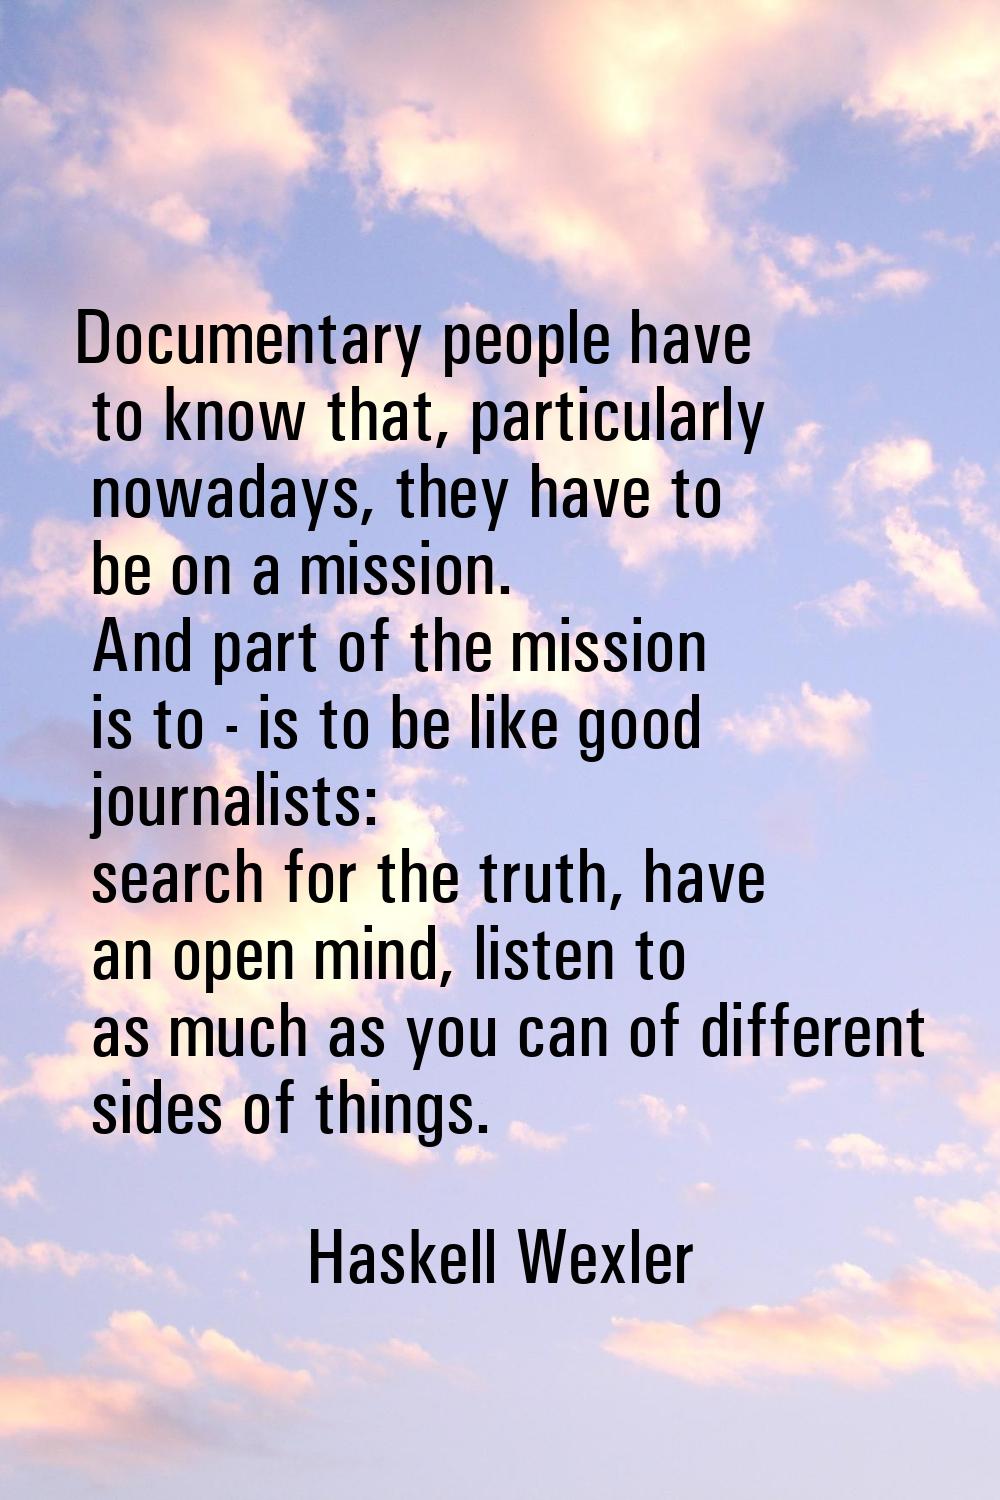 Documentary people have to know that, particularly nowadays, they have to be on a mission. And part